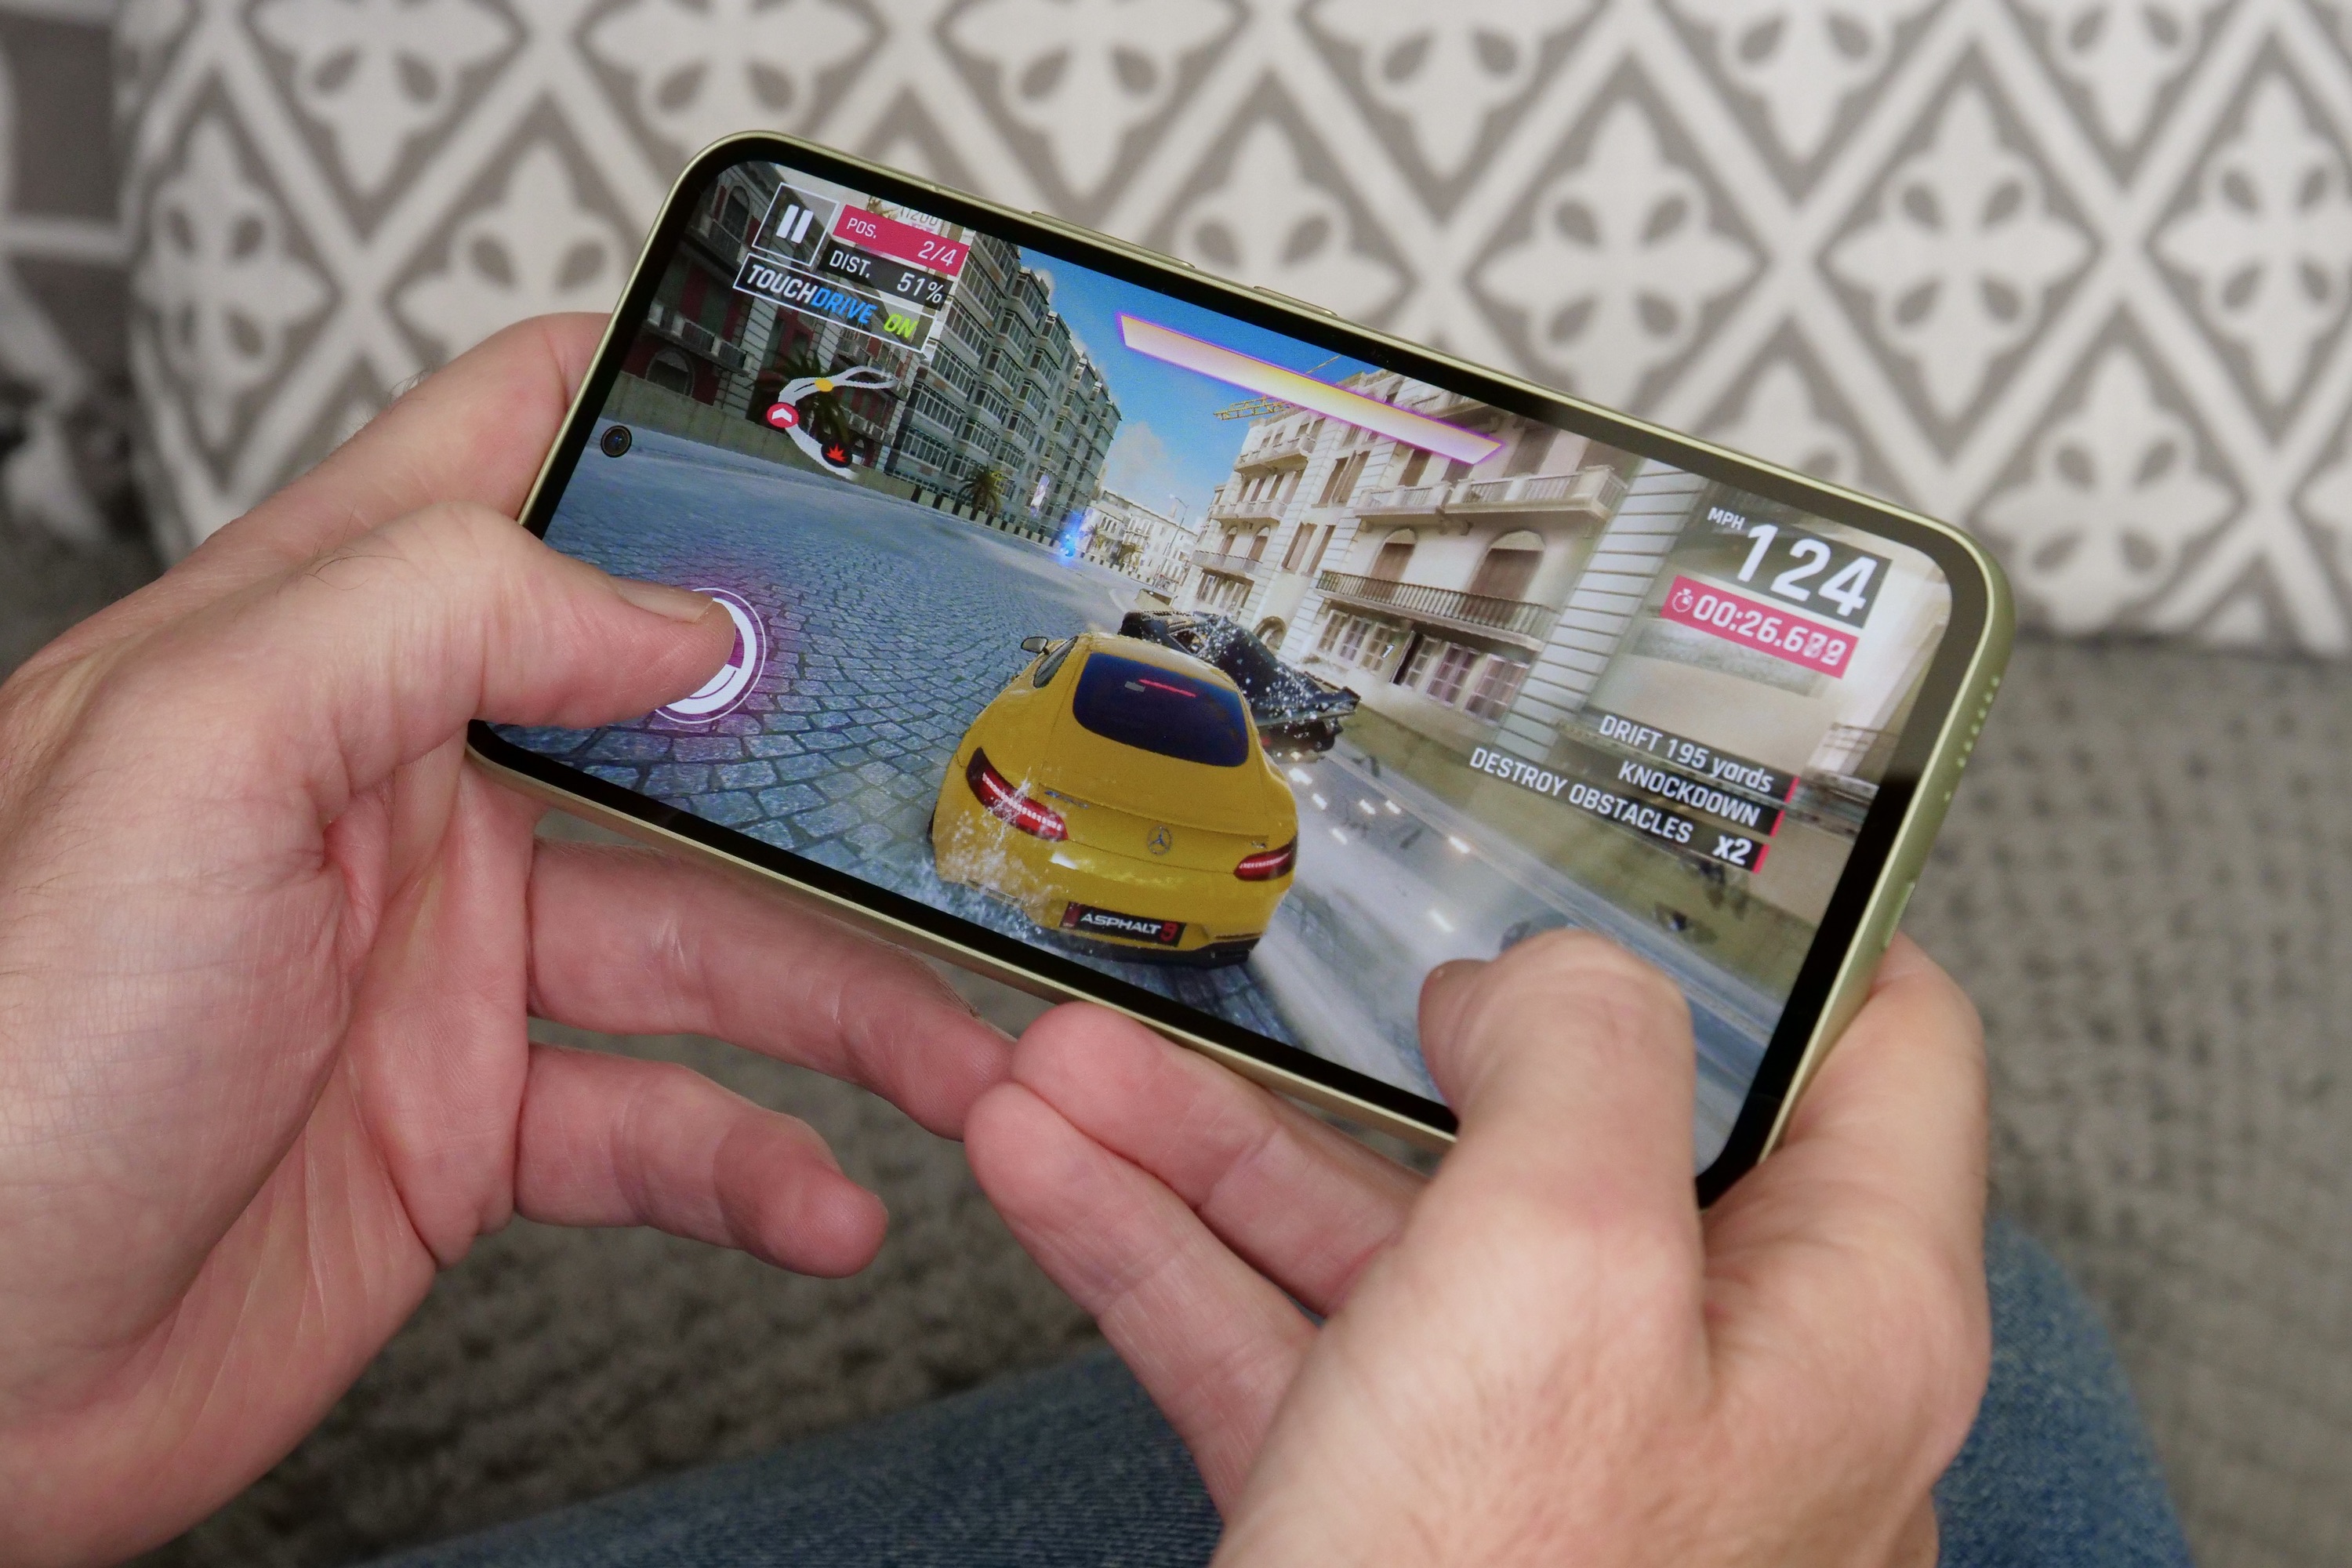 Asphalt 9 isn't compatible in my OnePlus 9 pro